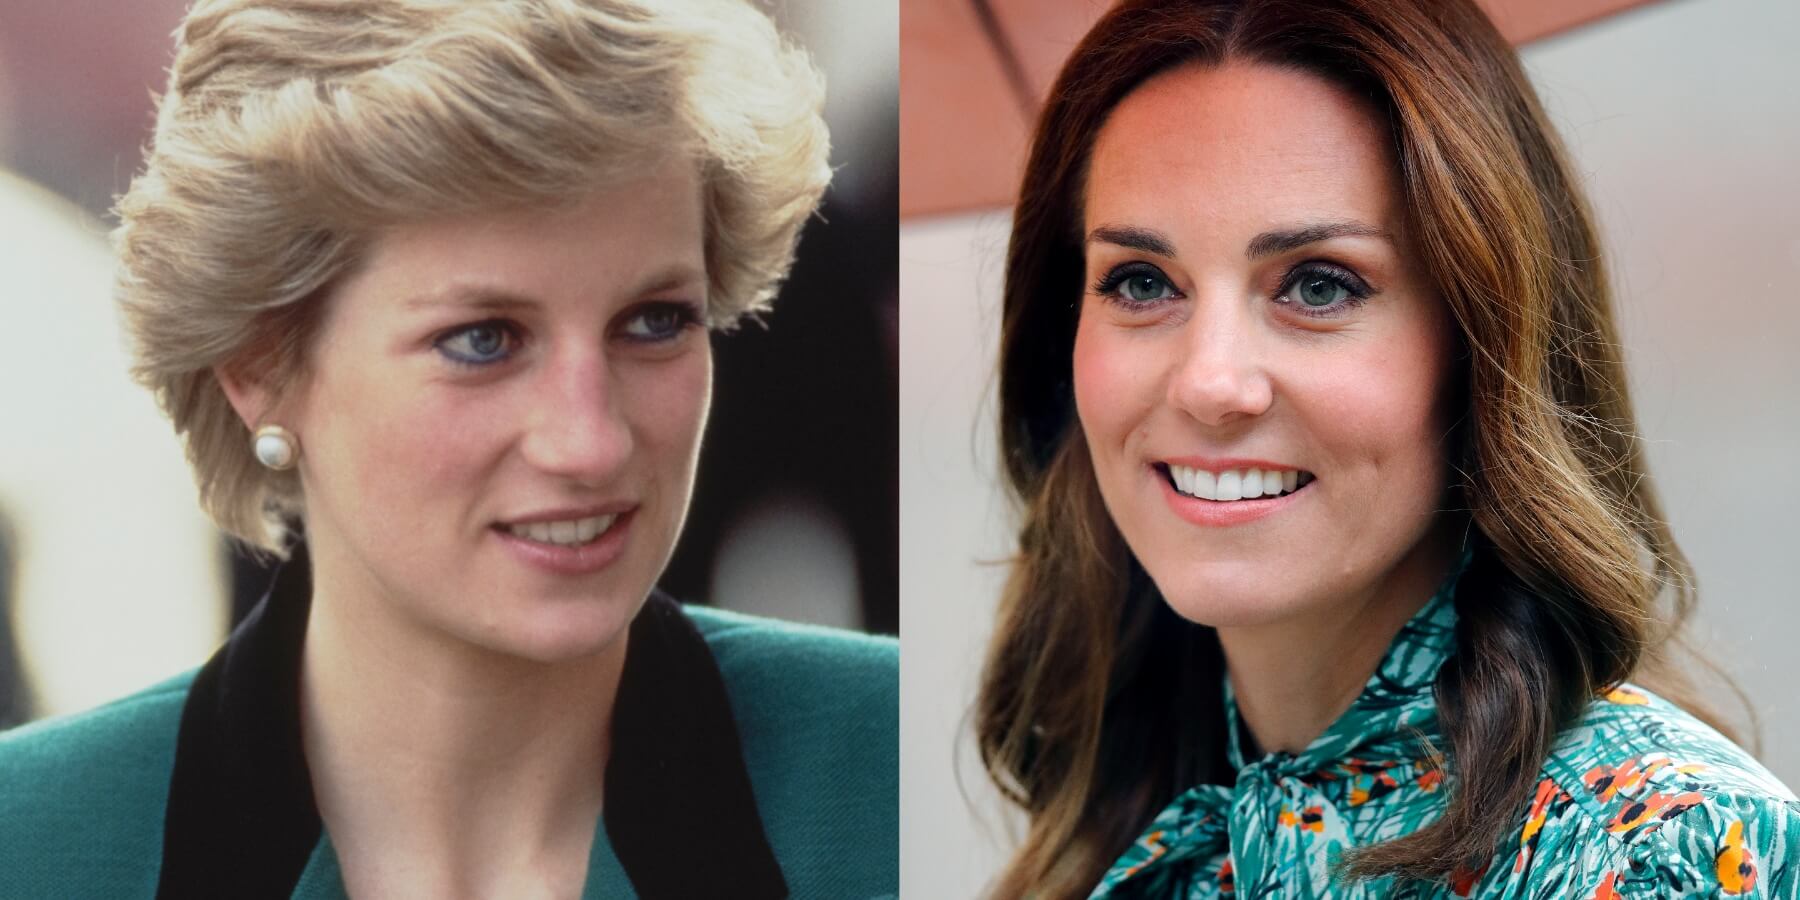 Princess Diana and Kate Middleton in side-by-side photograph